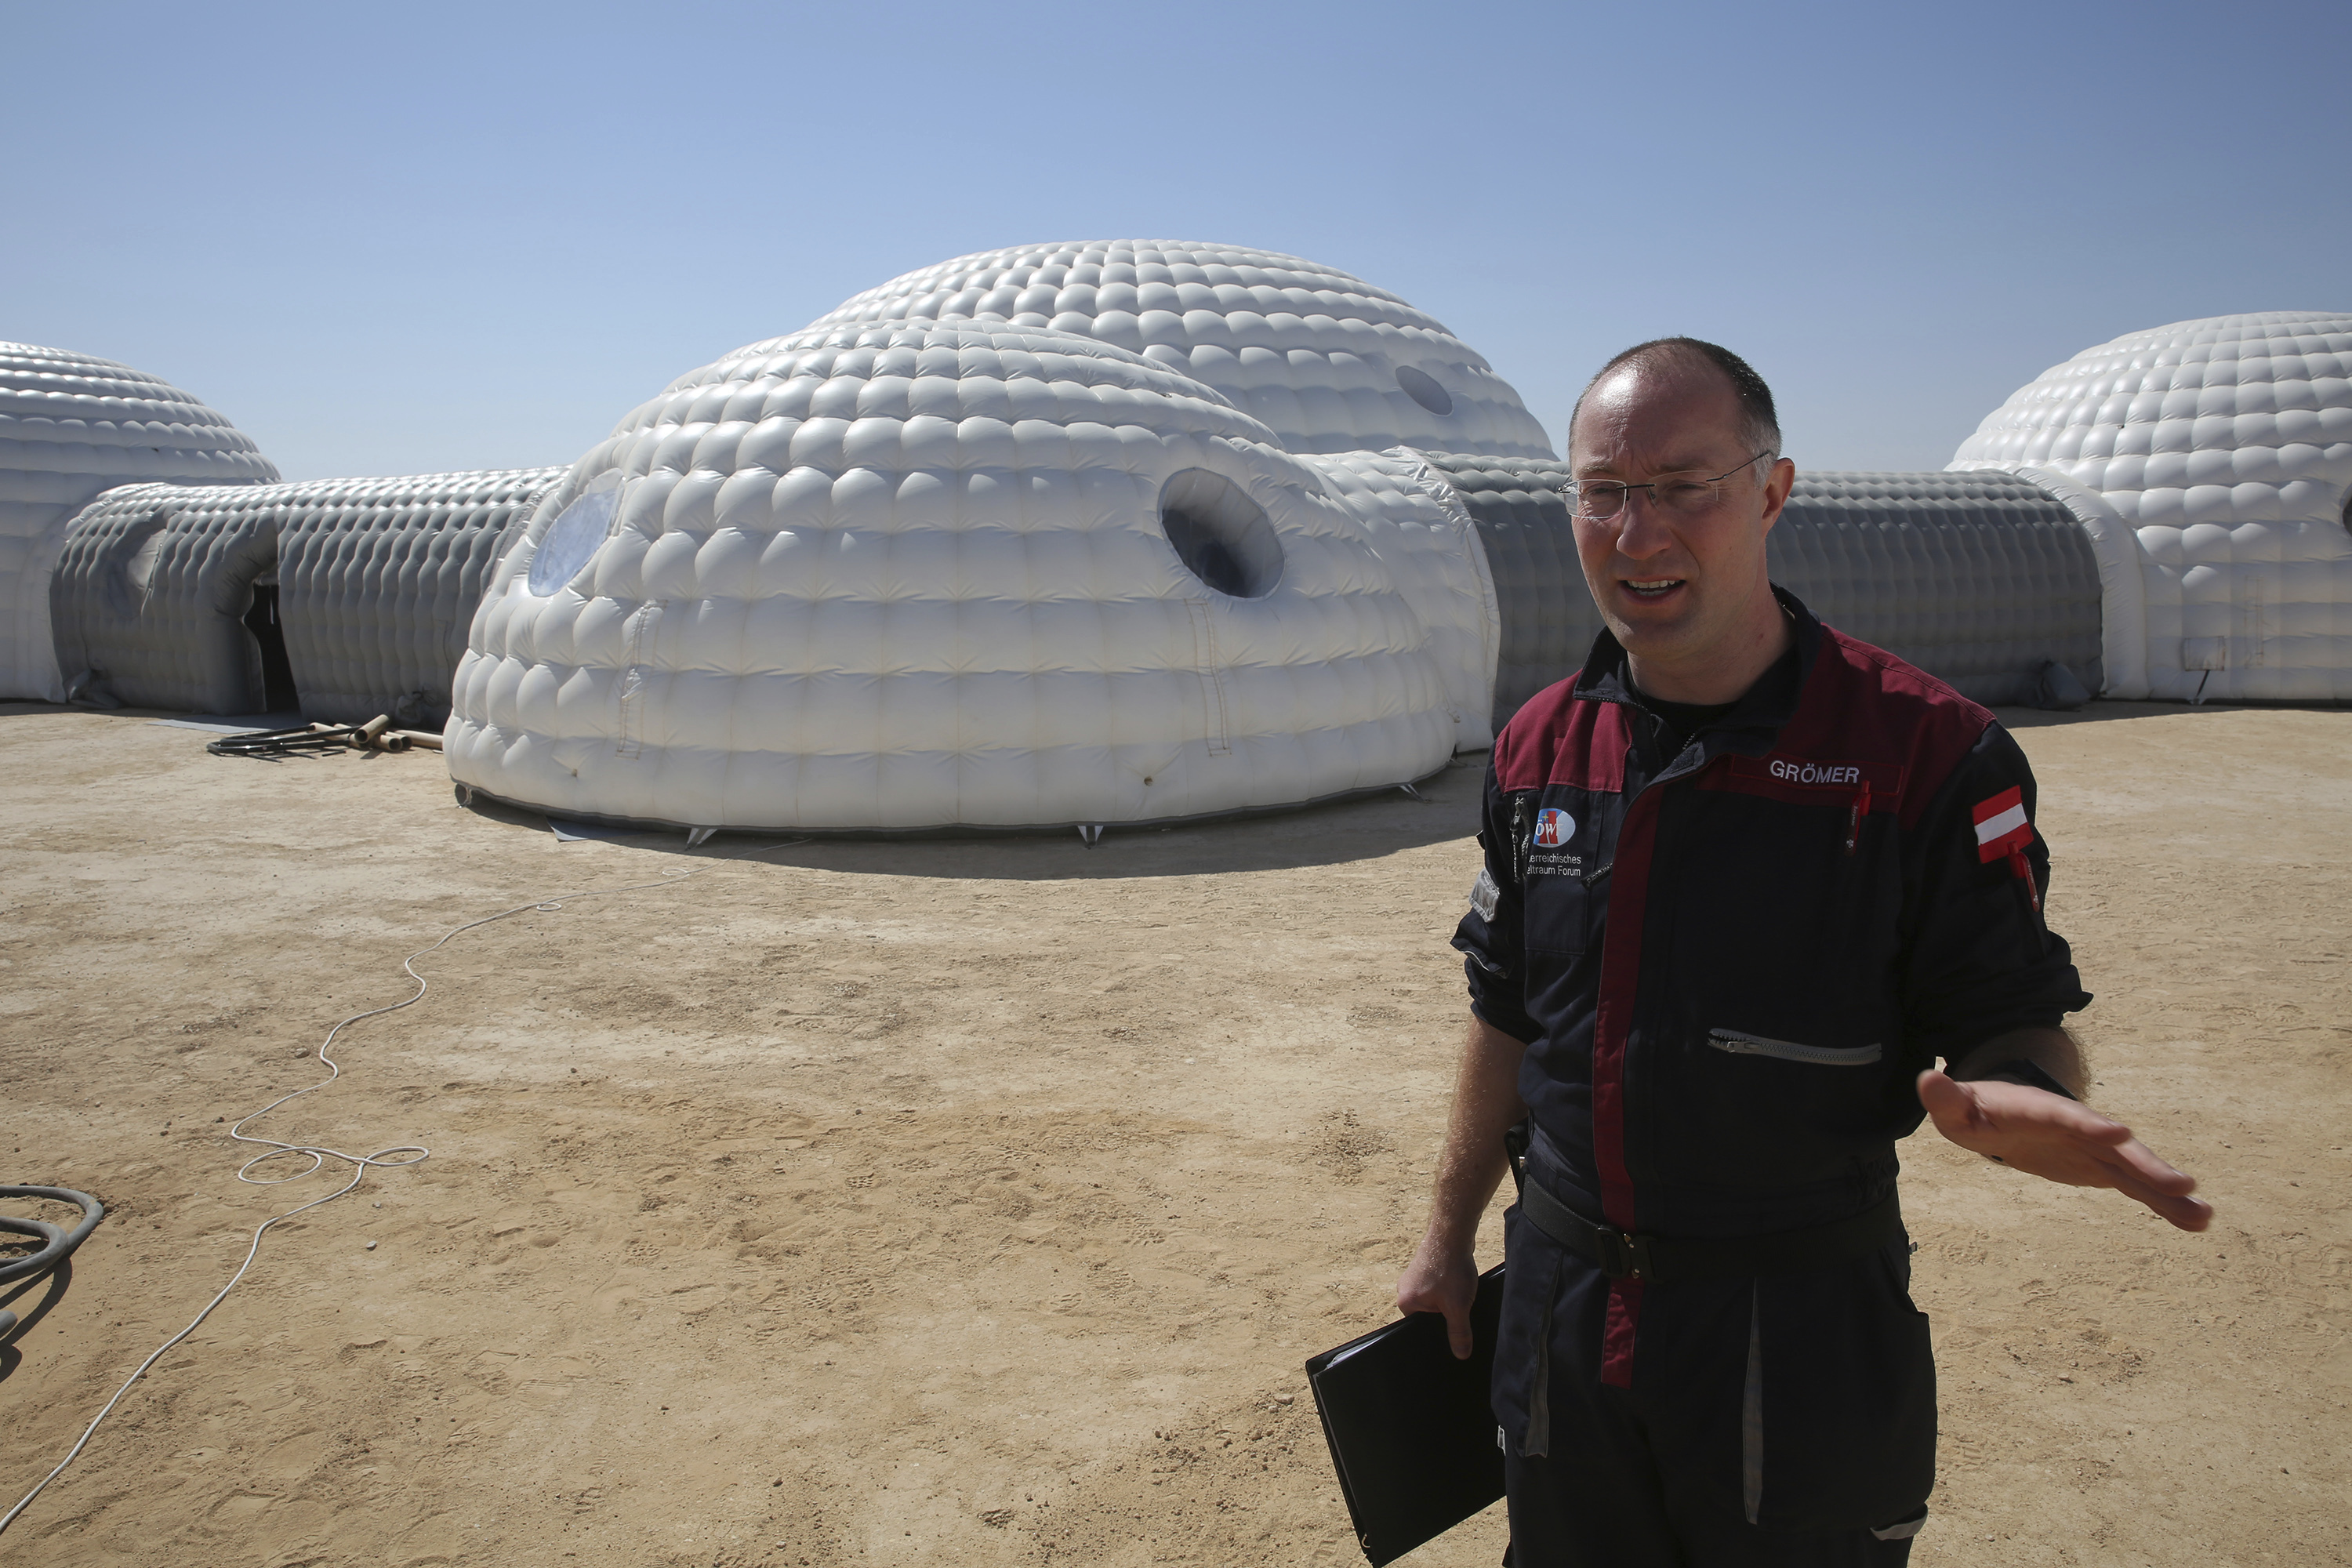 Gernot Groemer, commander of the AMADEE-18 Mars simulation in the Dhofar desert of southern Oman (Sam McNeil/AP)